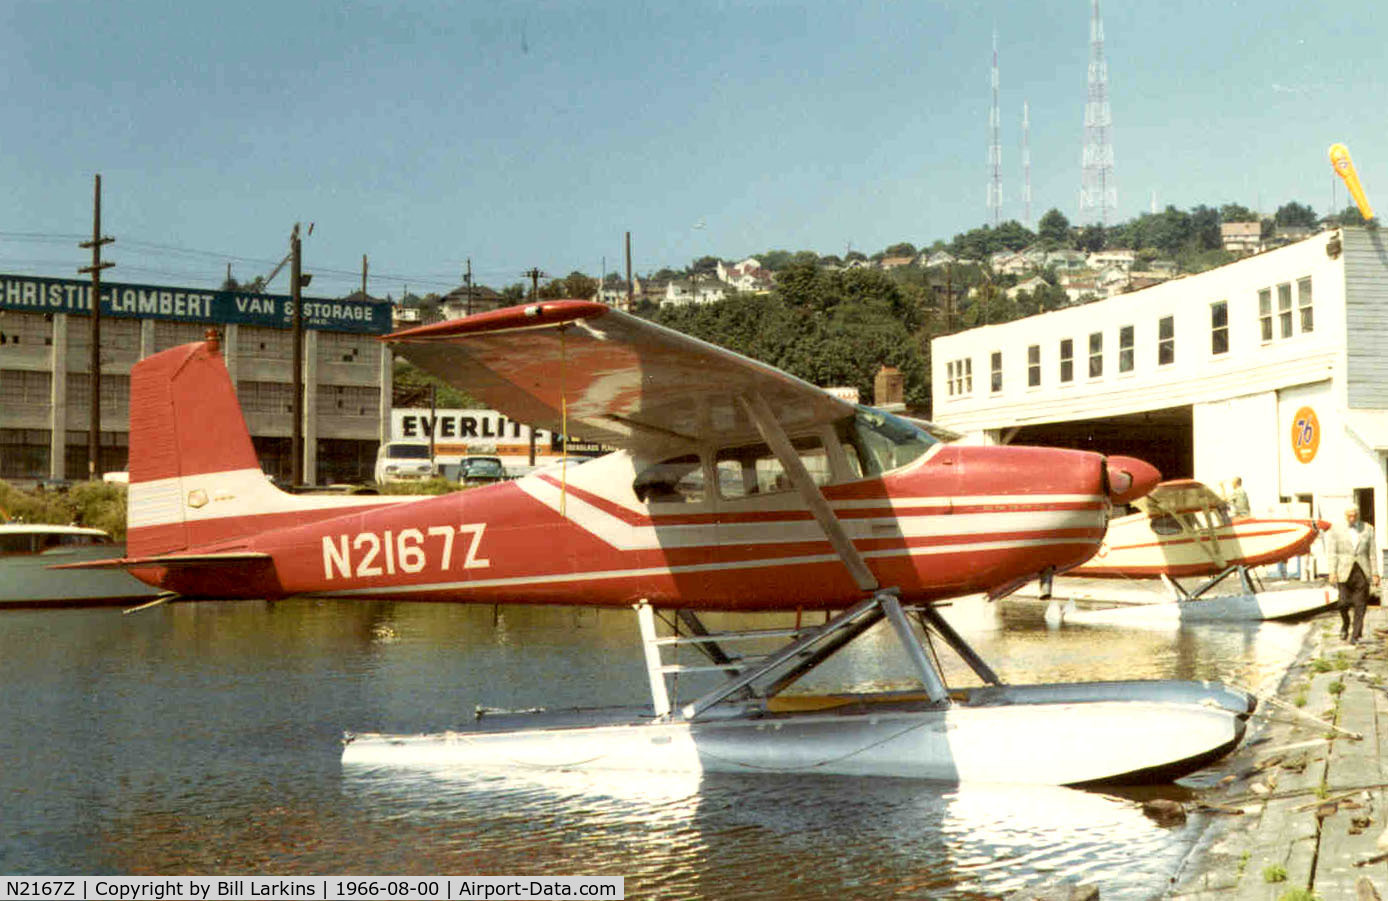 N2167Z, 2007 Fisher Products FP303 C/N RM1955, Lake Union, Seattle